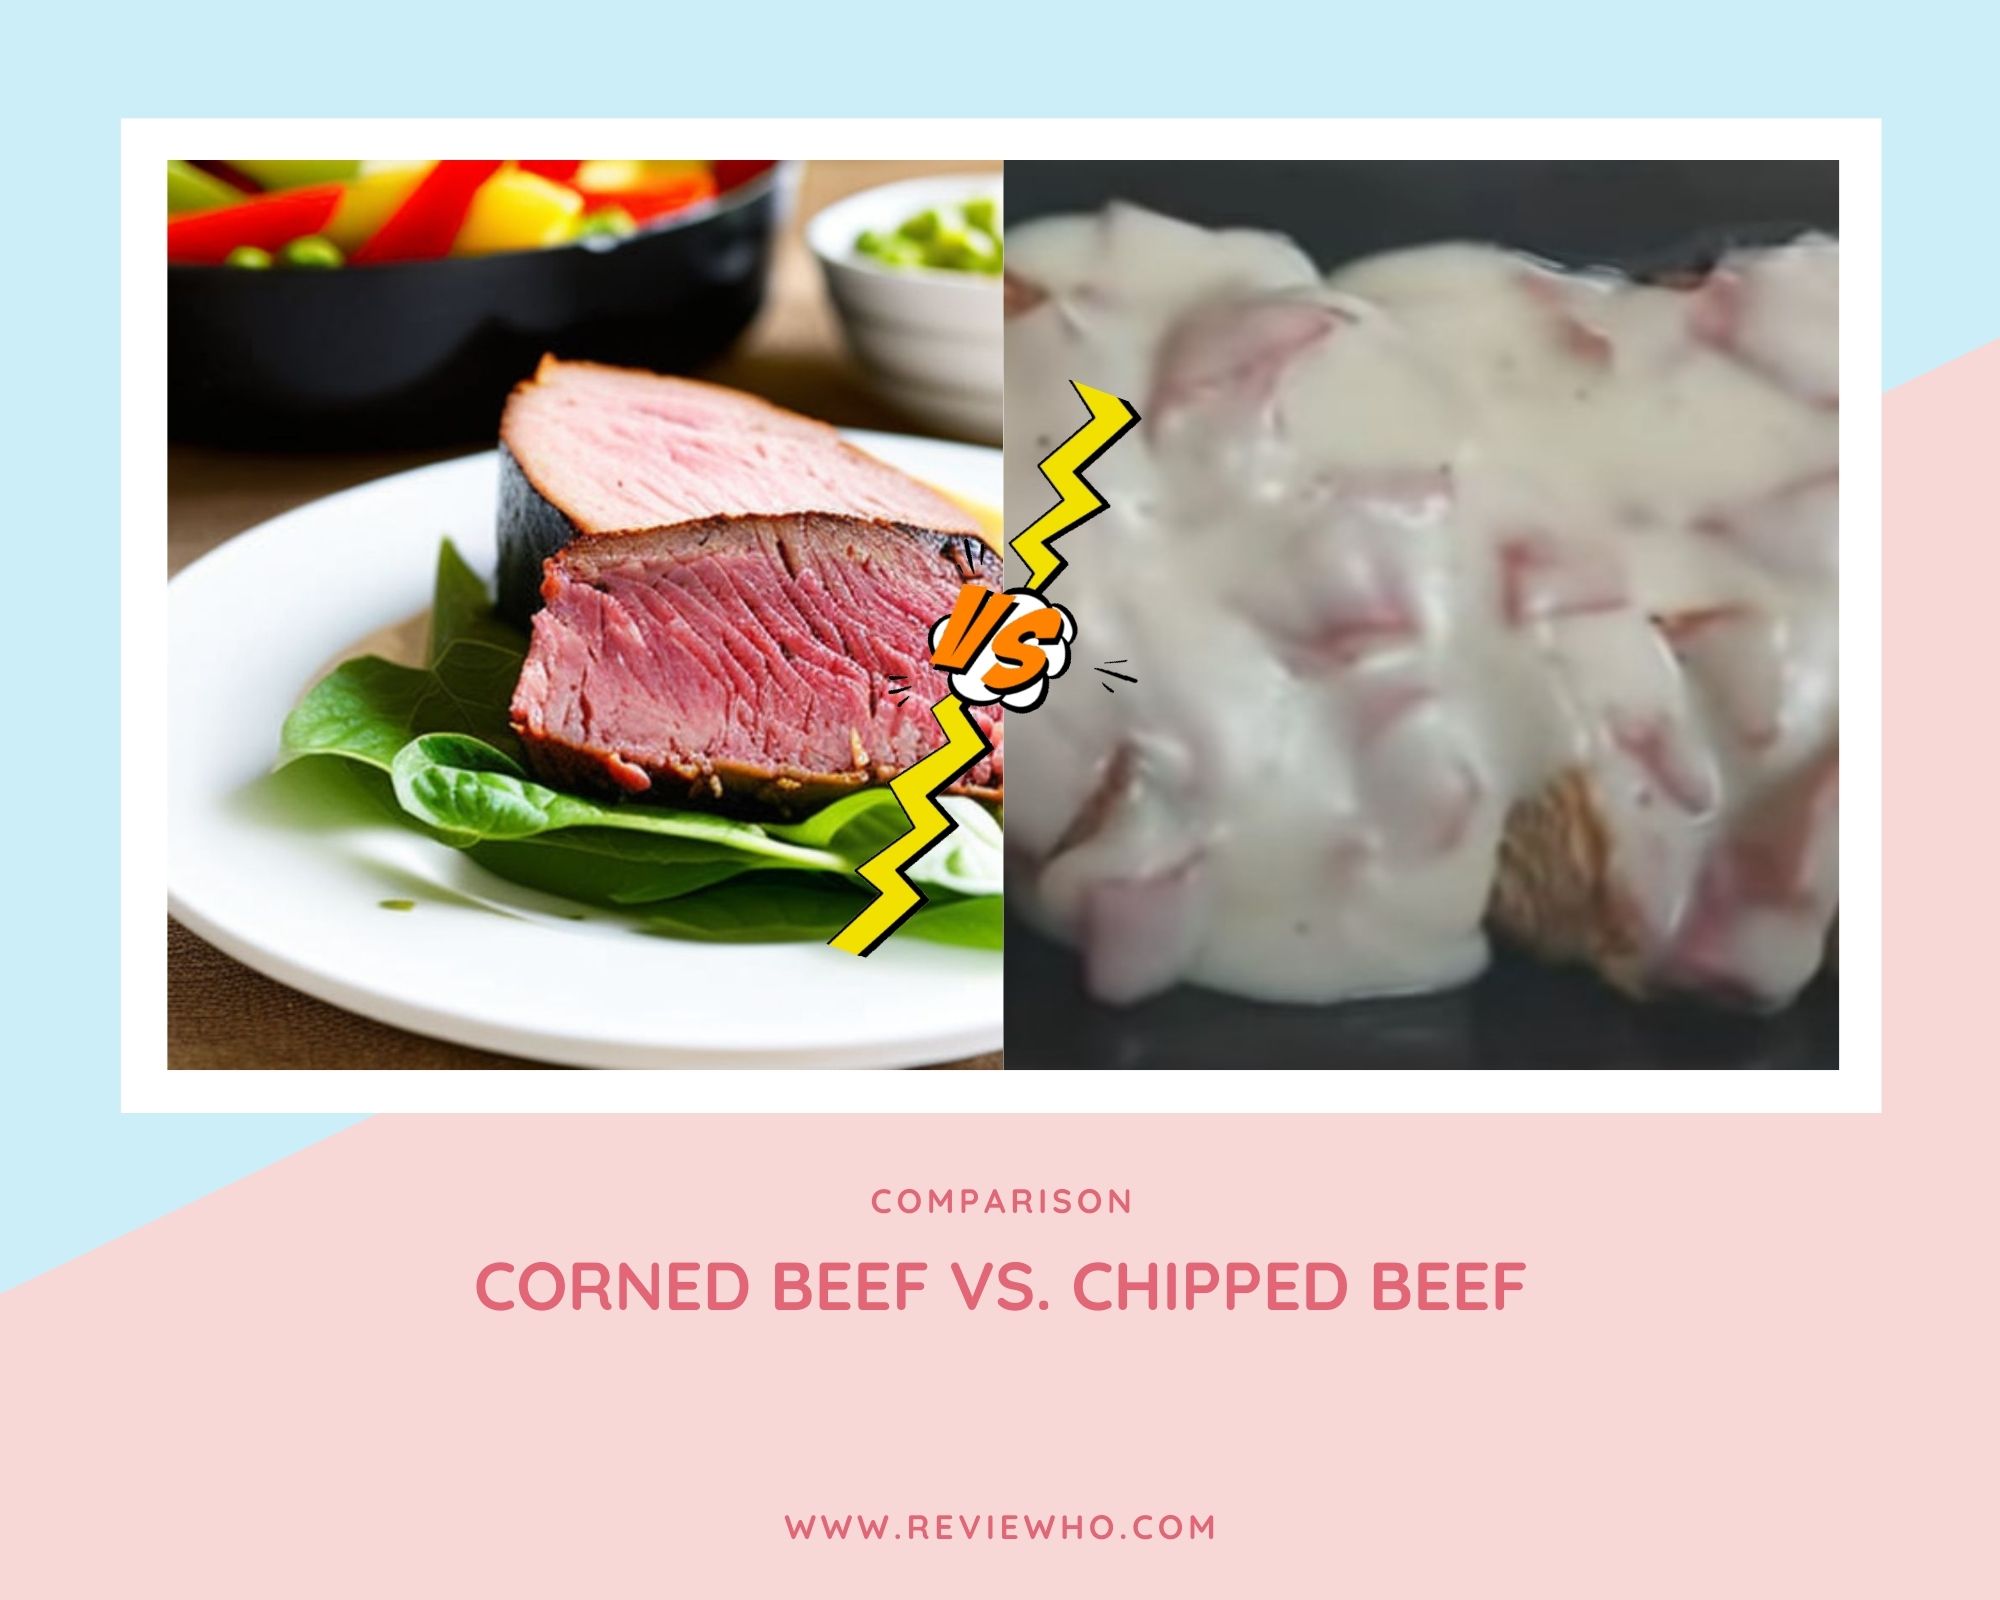 Difference Between Chipped Beef and Corned Beef